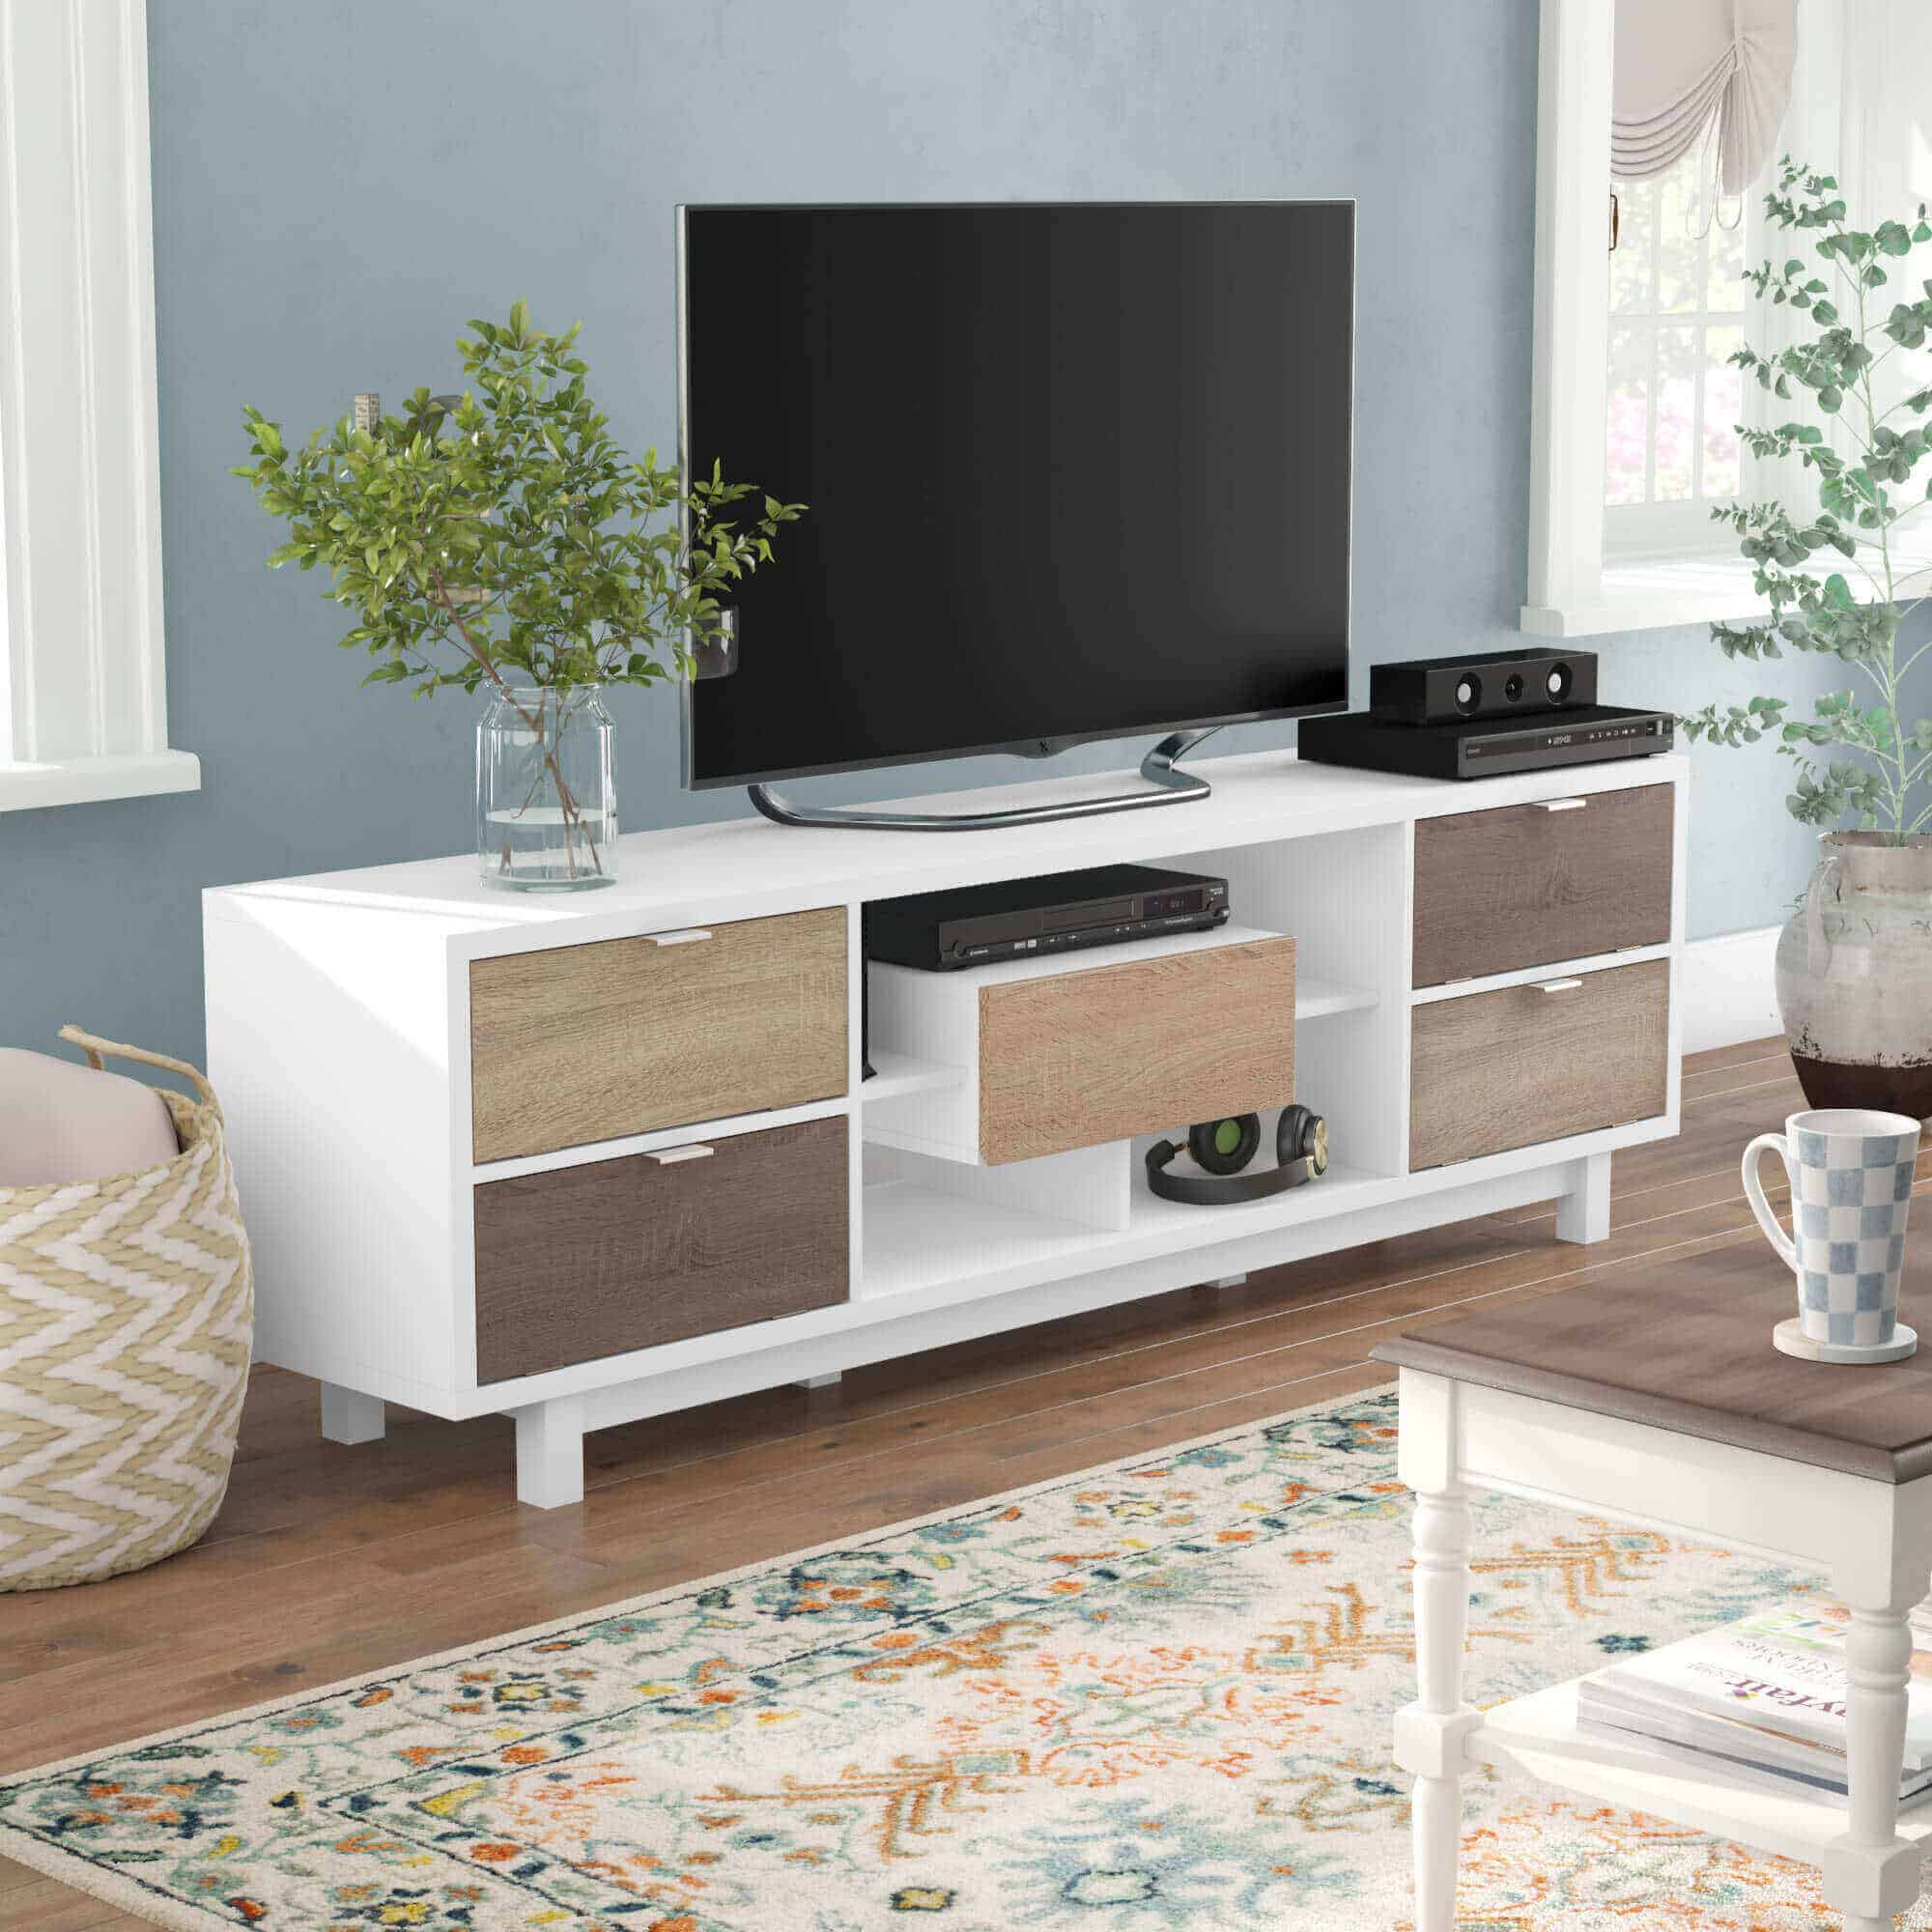 Most Beautiful and Incredible TV Stand Design Ideas